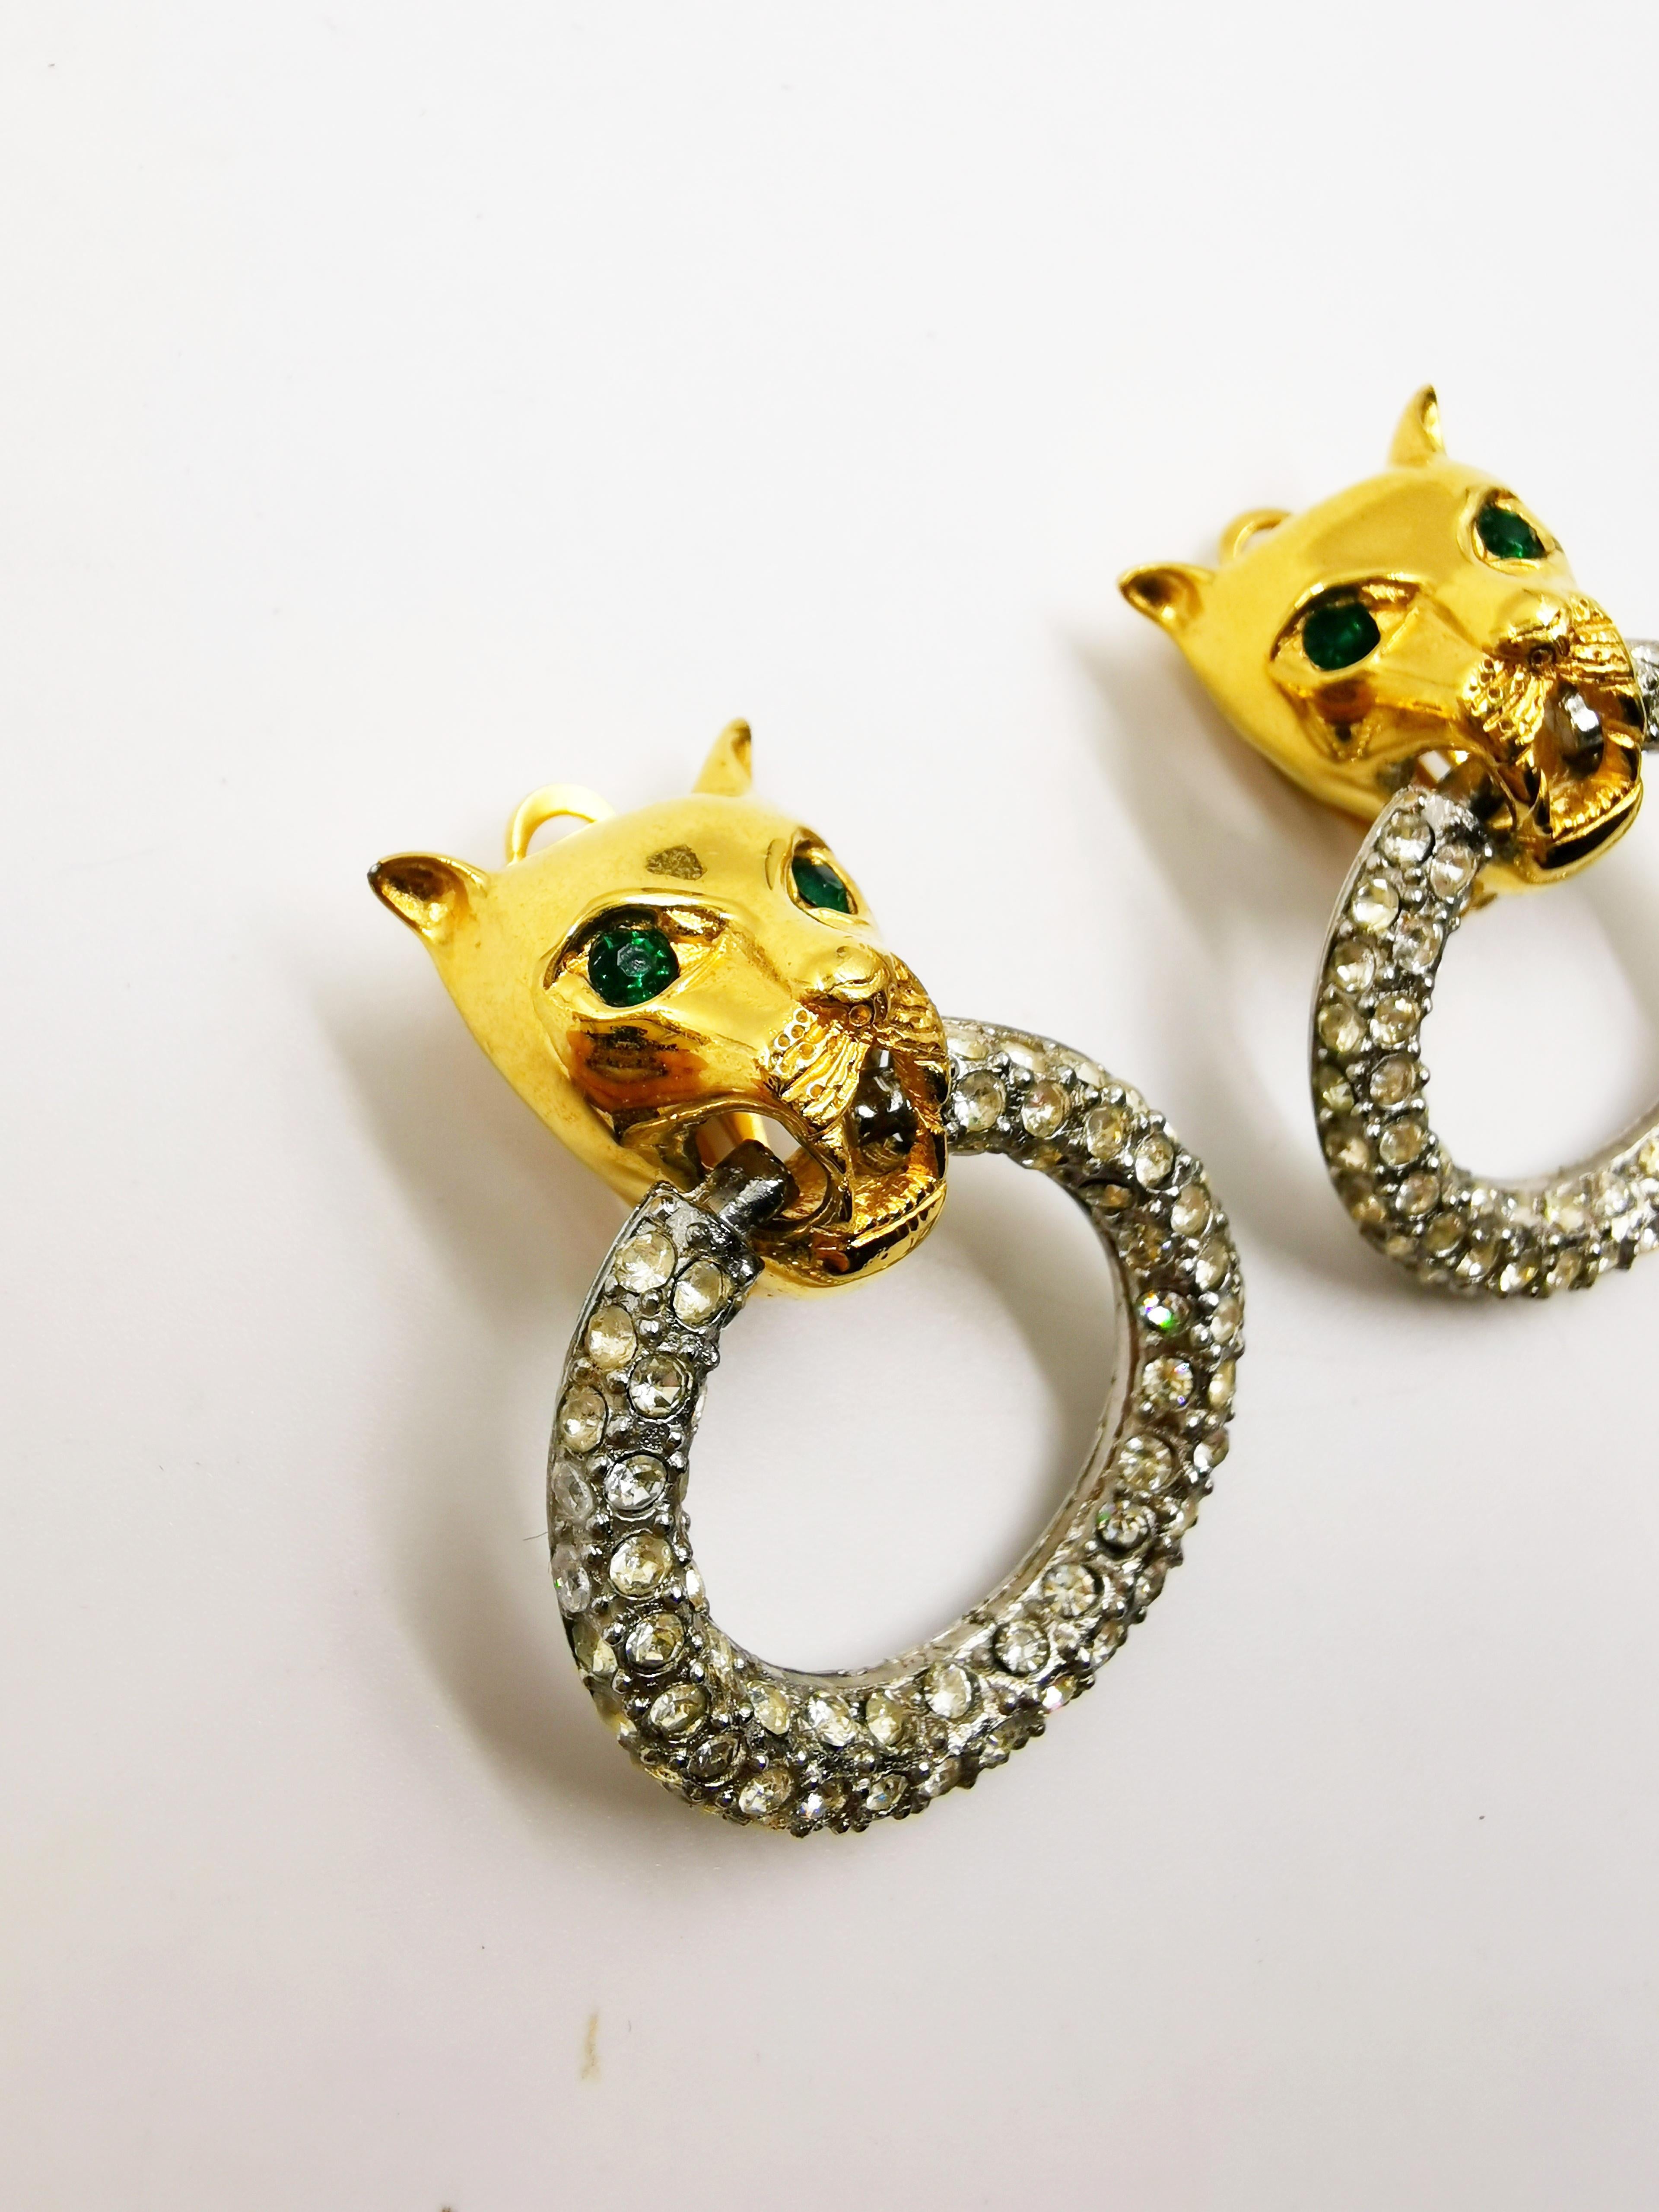 Vintage 1980'S Givenchy Jaguar Earrings, Collector piece.

Feature
Material: Gold/Silver-tone Metal and Rhinestones
Condition: Good
Colour: Silver and Gold
Period: 1980-
Place of Origin: France